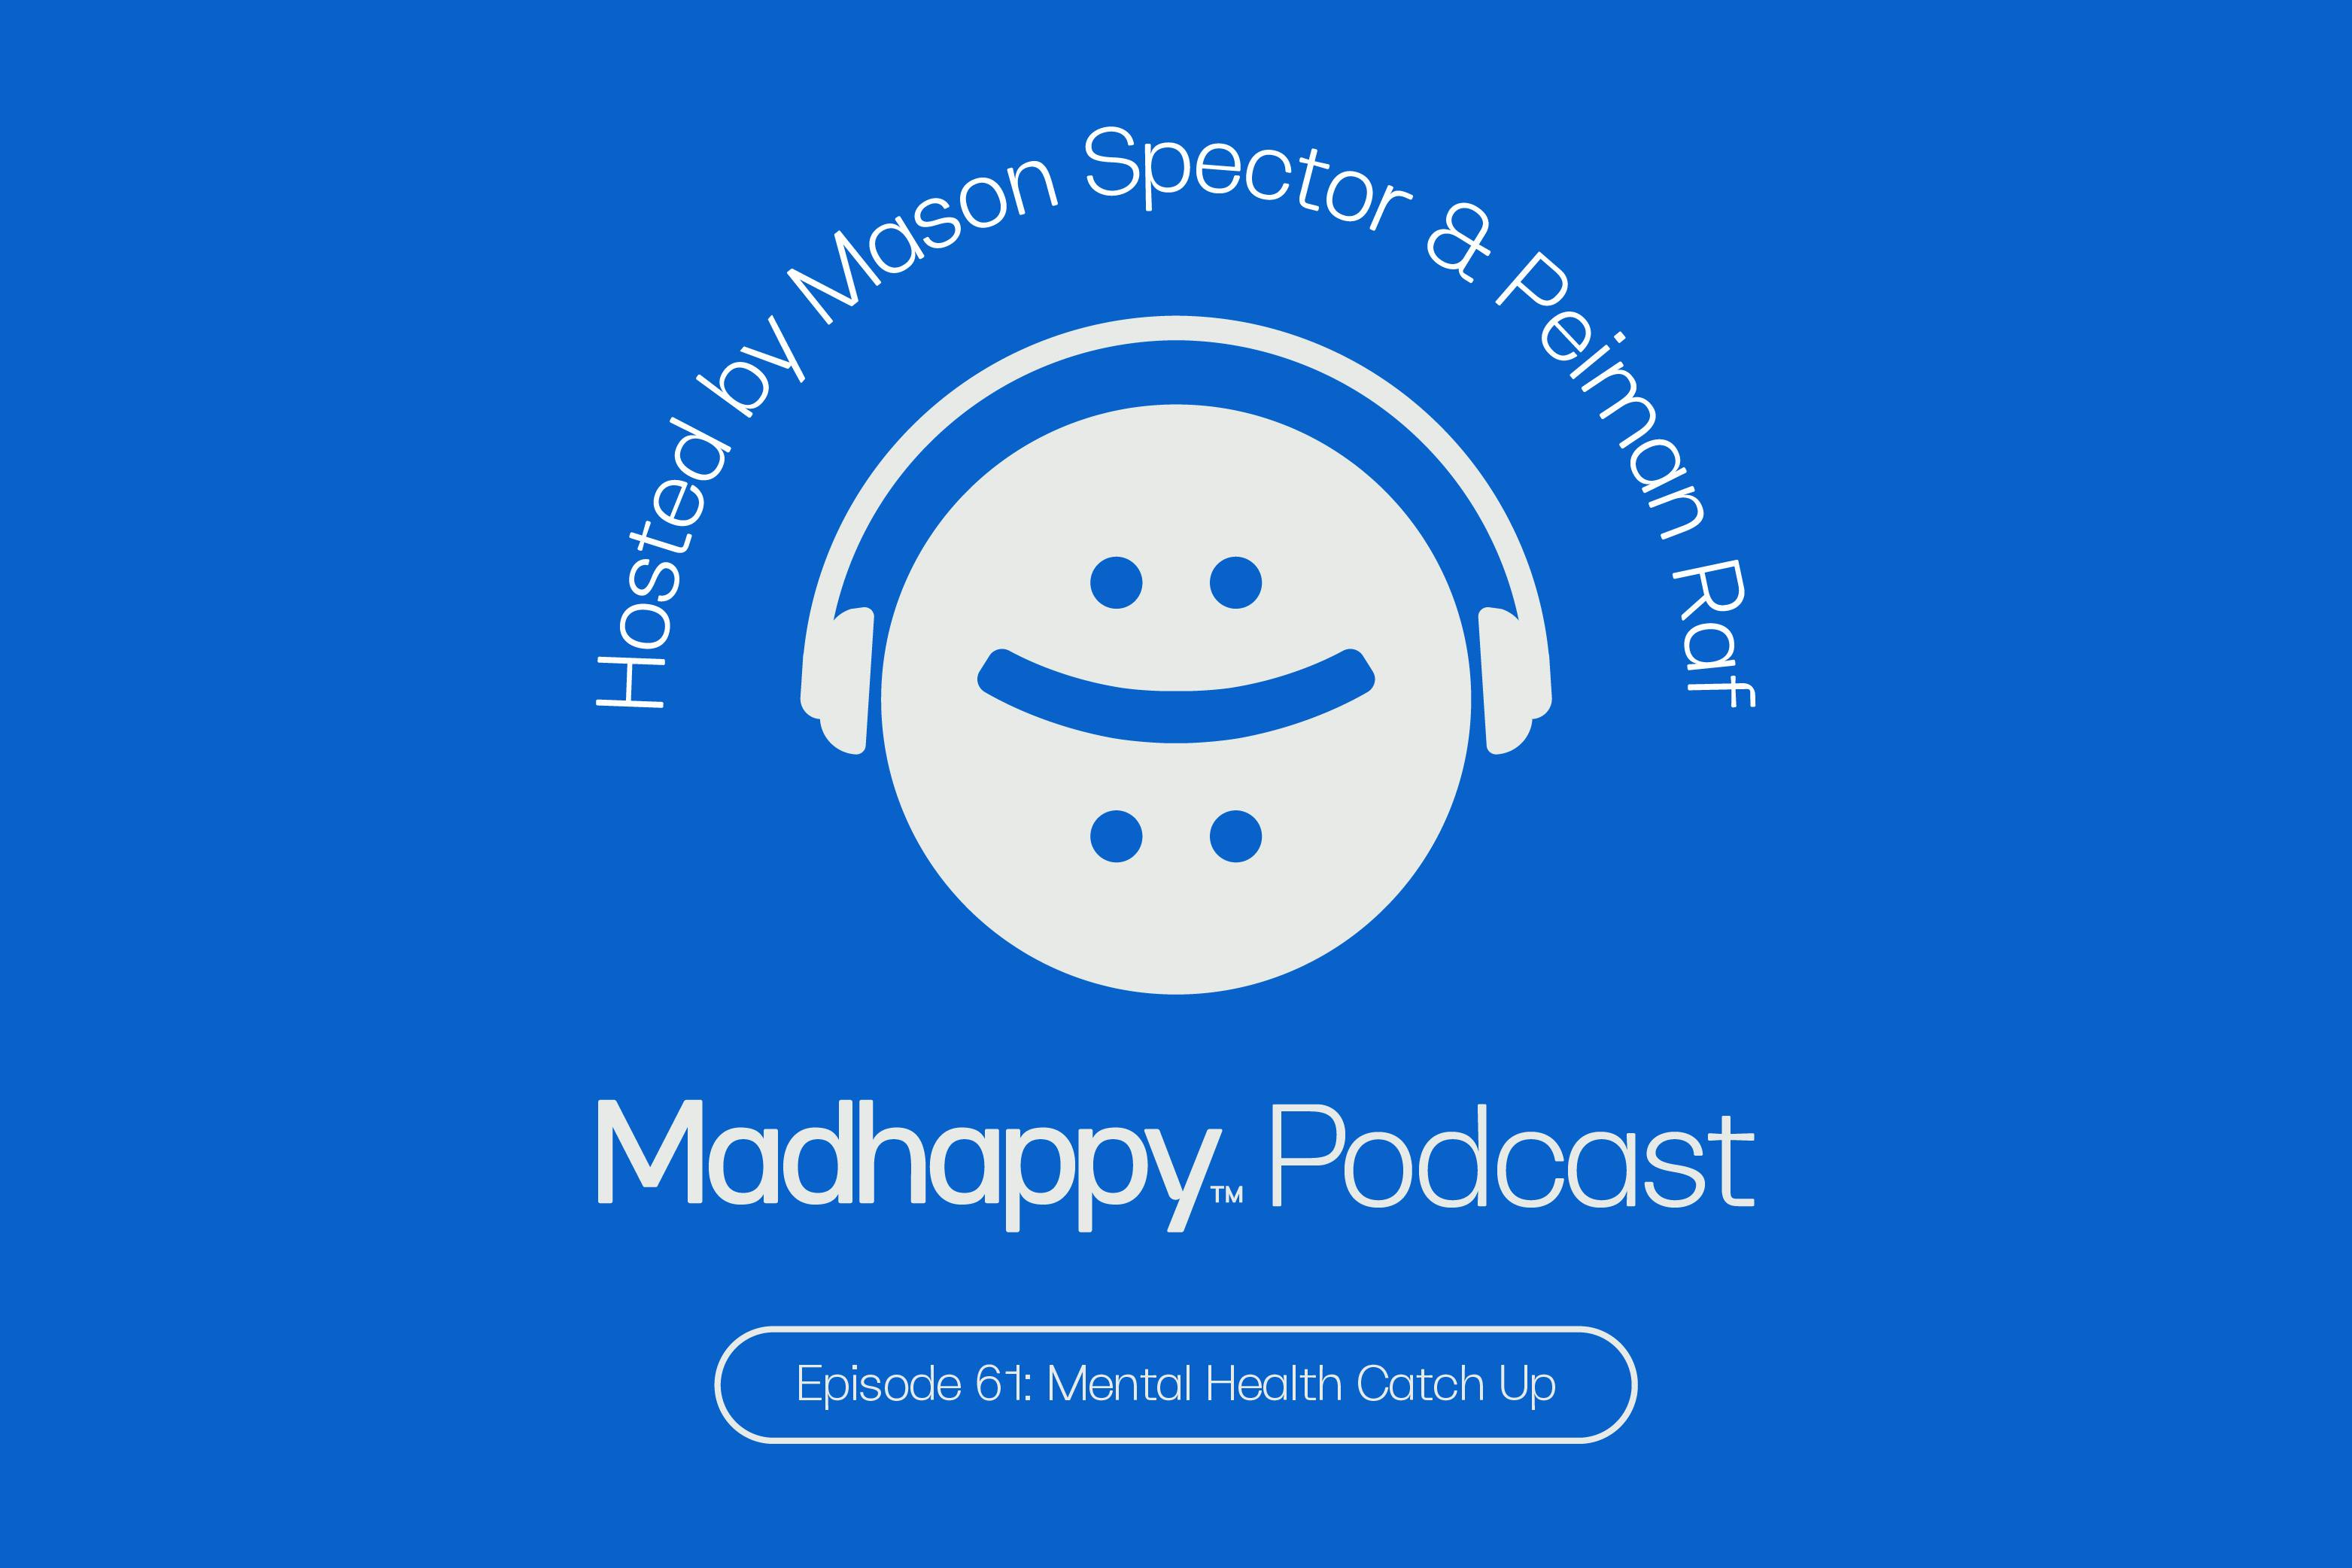 Episode 61: Peiman, Mason and Phineas on Emotions, Proactivity, and Friendships